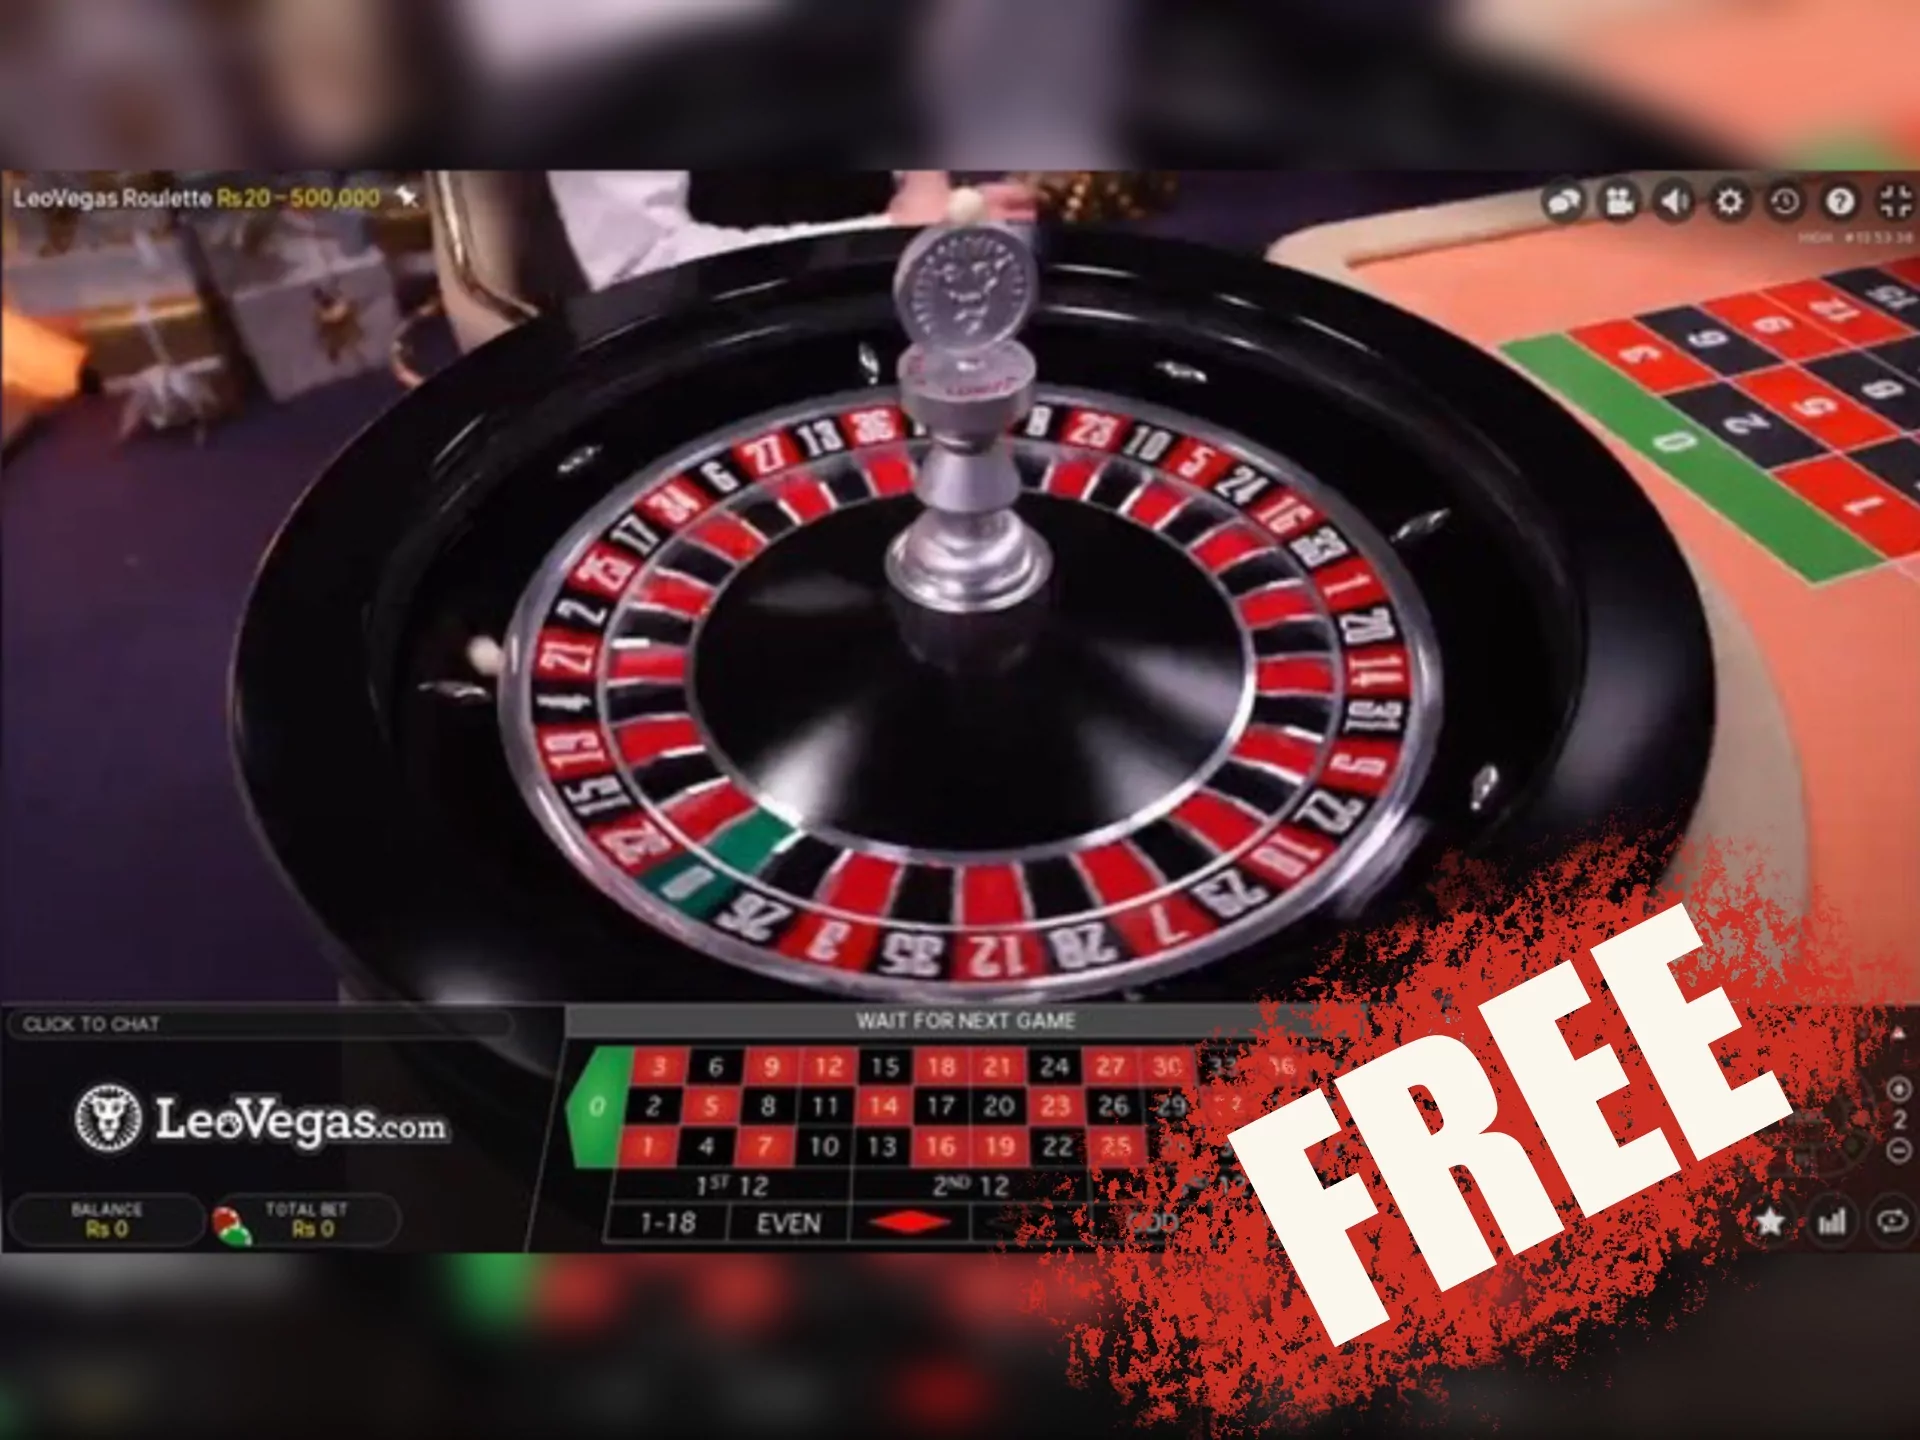 Try to play online roulette for free, if you are a beginner, and then place bets on money.